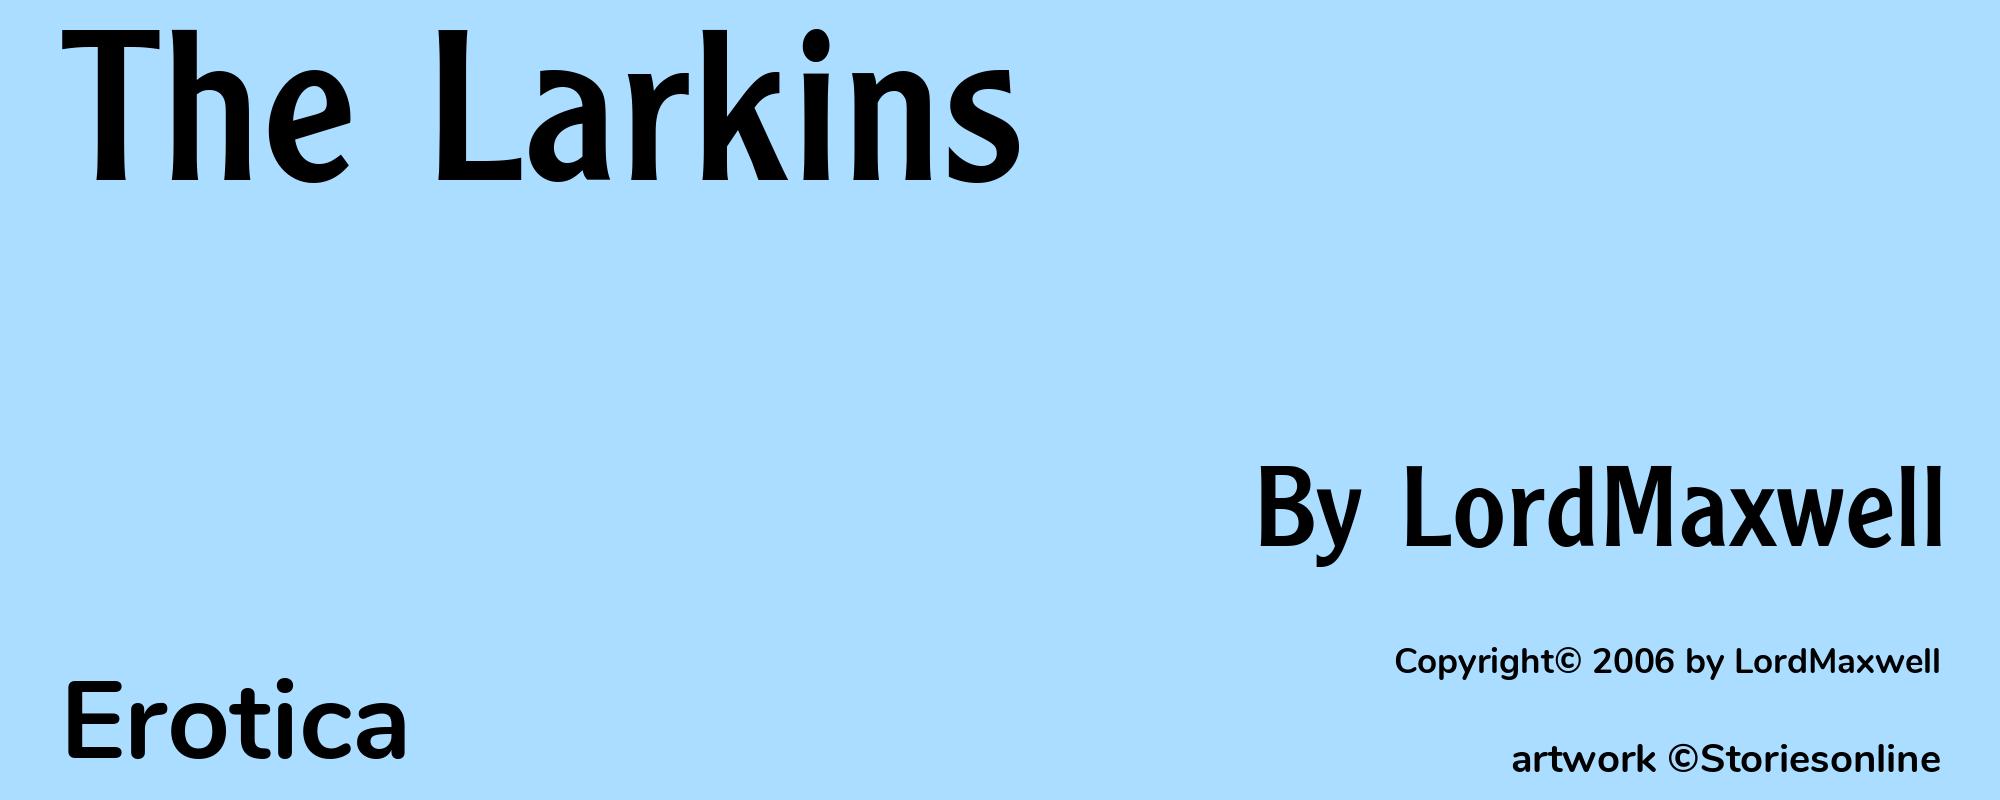 The Larkins - Cover